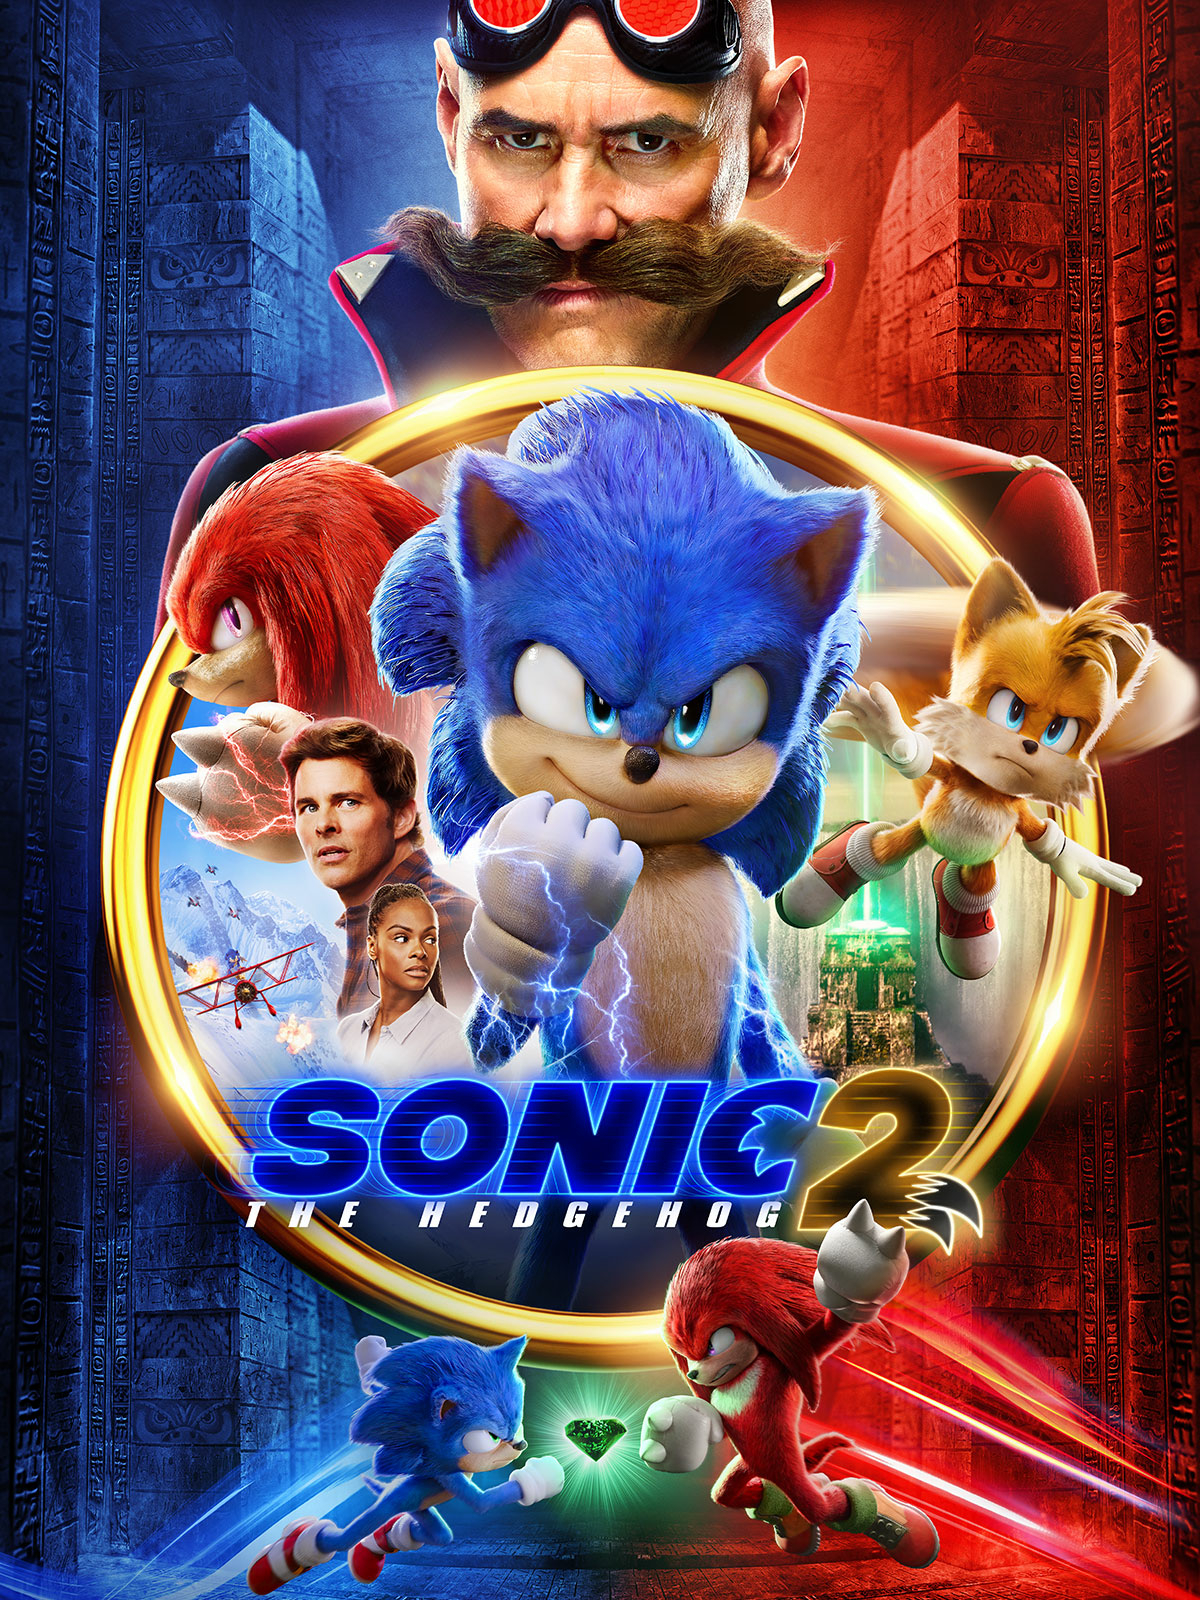 What time is Sonic the Hedgehog 2 coming to Prime Video?